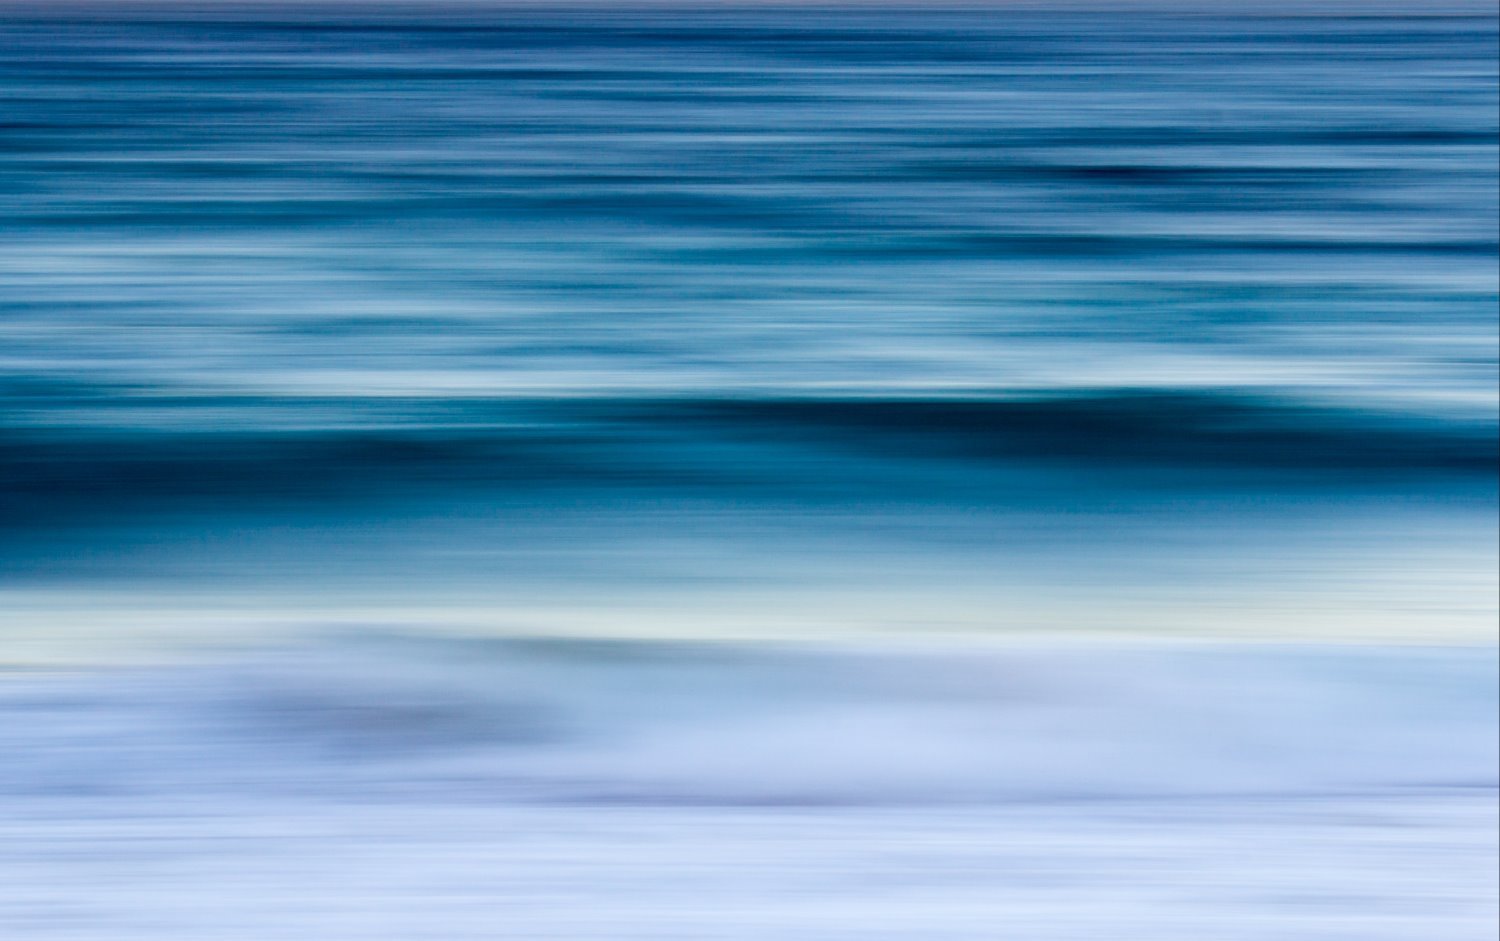 people in motion, ICM-Intentional Camera Movement